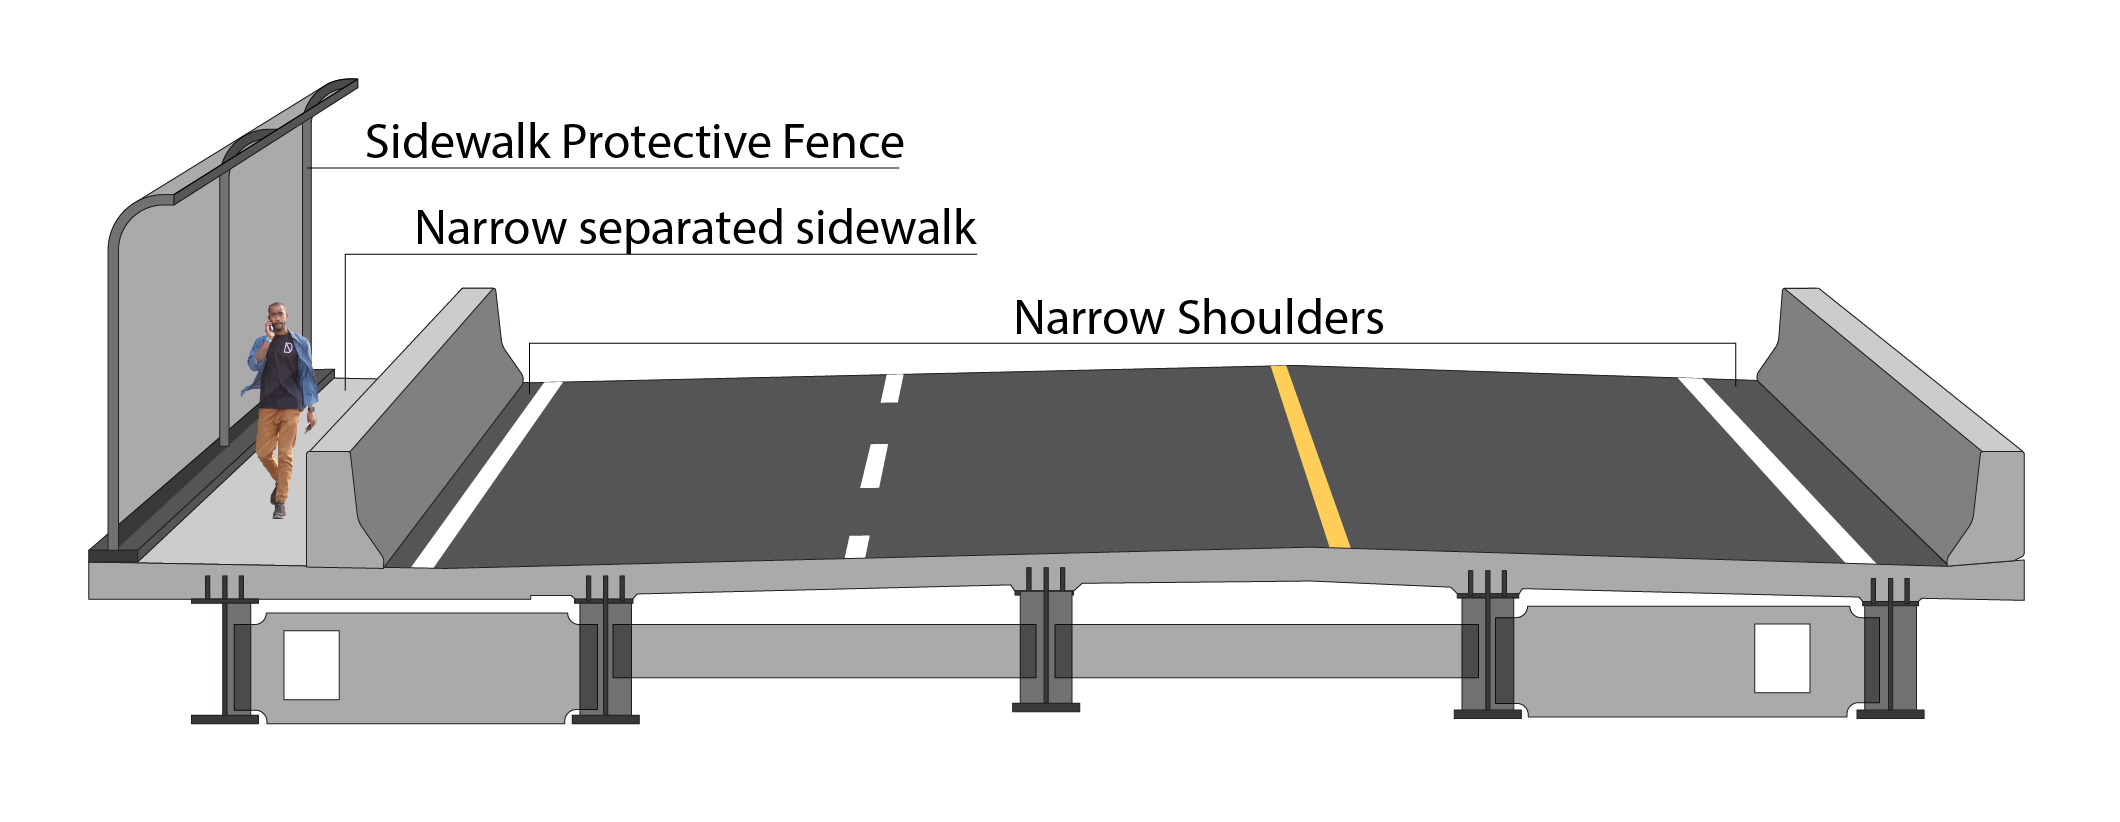 Cross-section of a bridge with a sidewalk protective fence and narrow separated sidewalk on one side, narrow shoulders, two lanes southbound and one lane northbound.